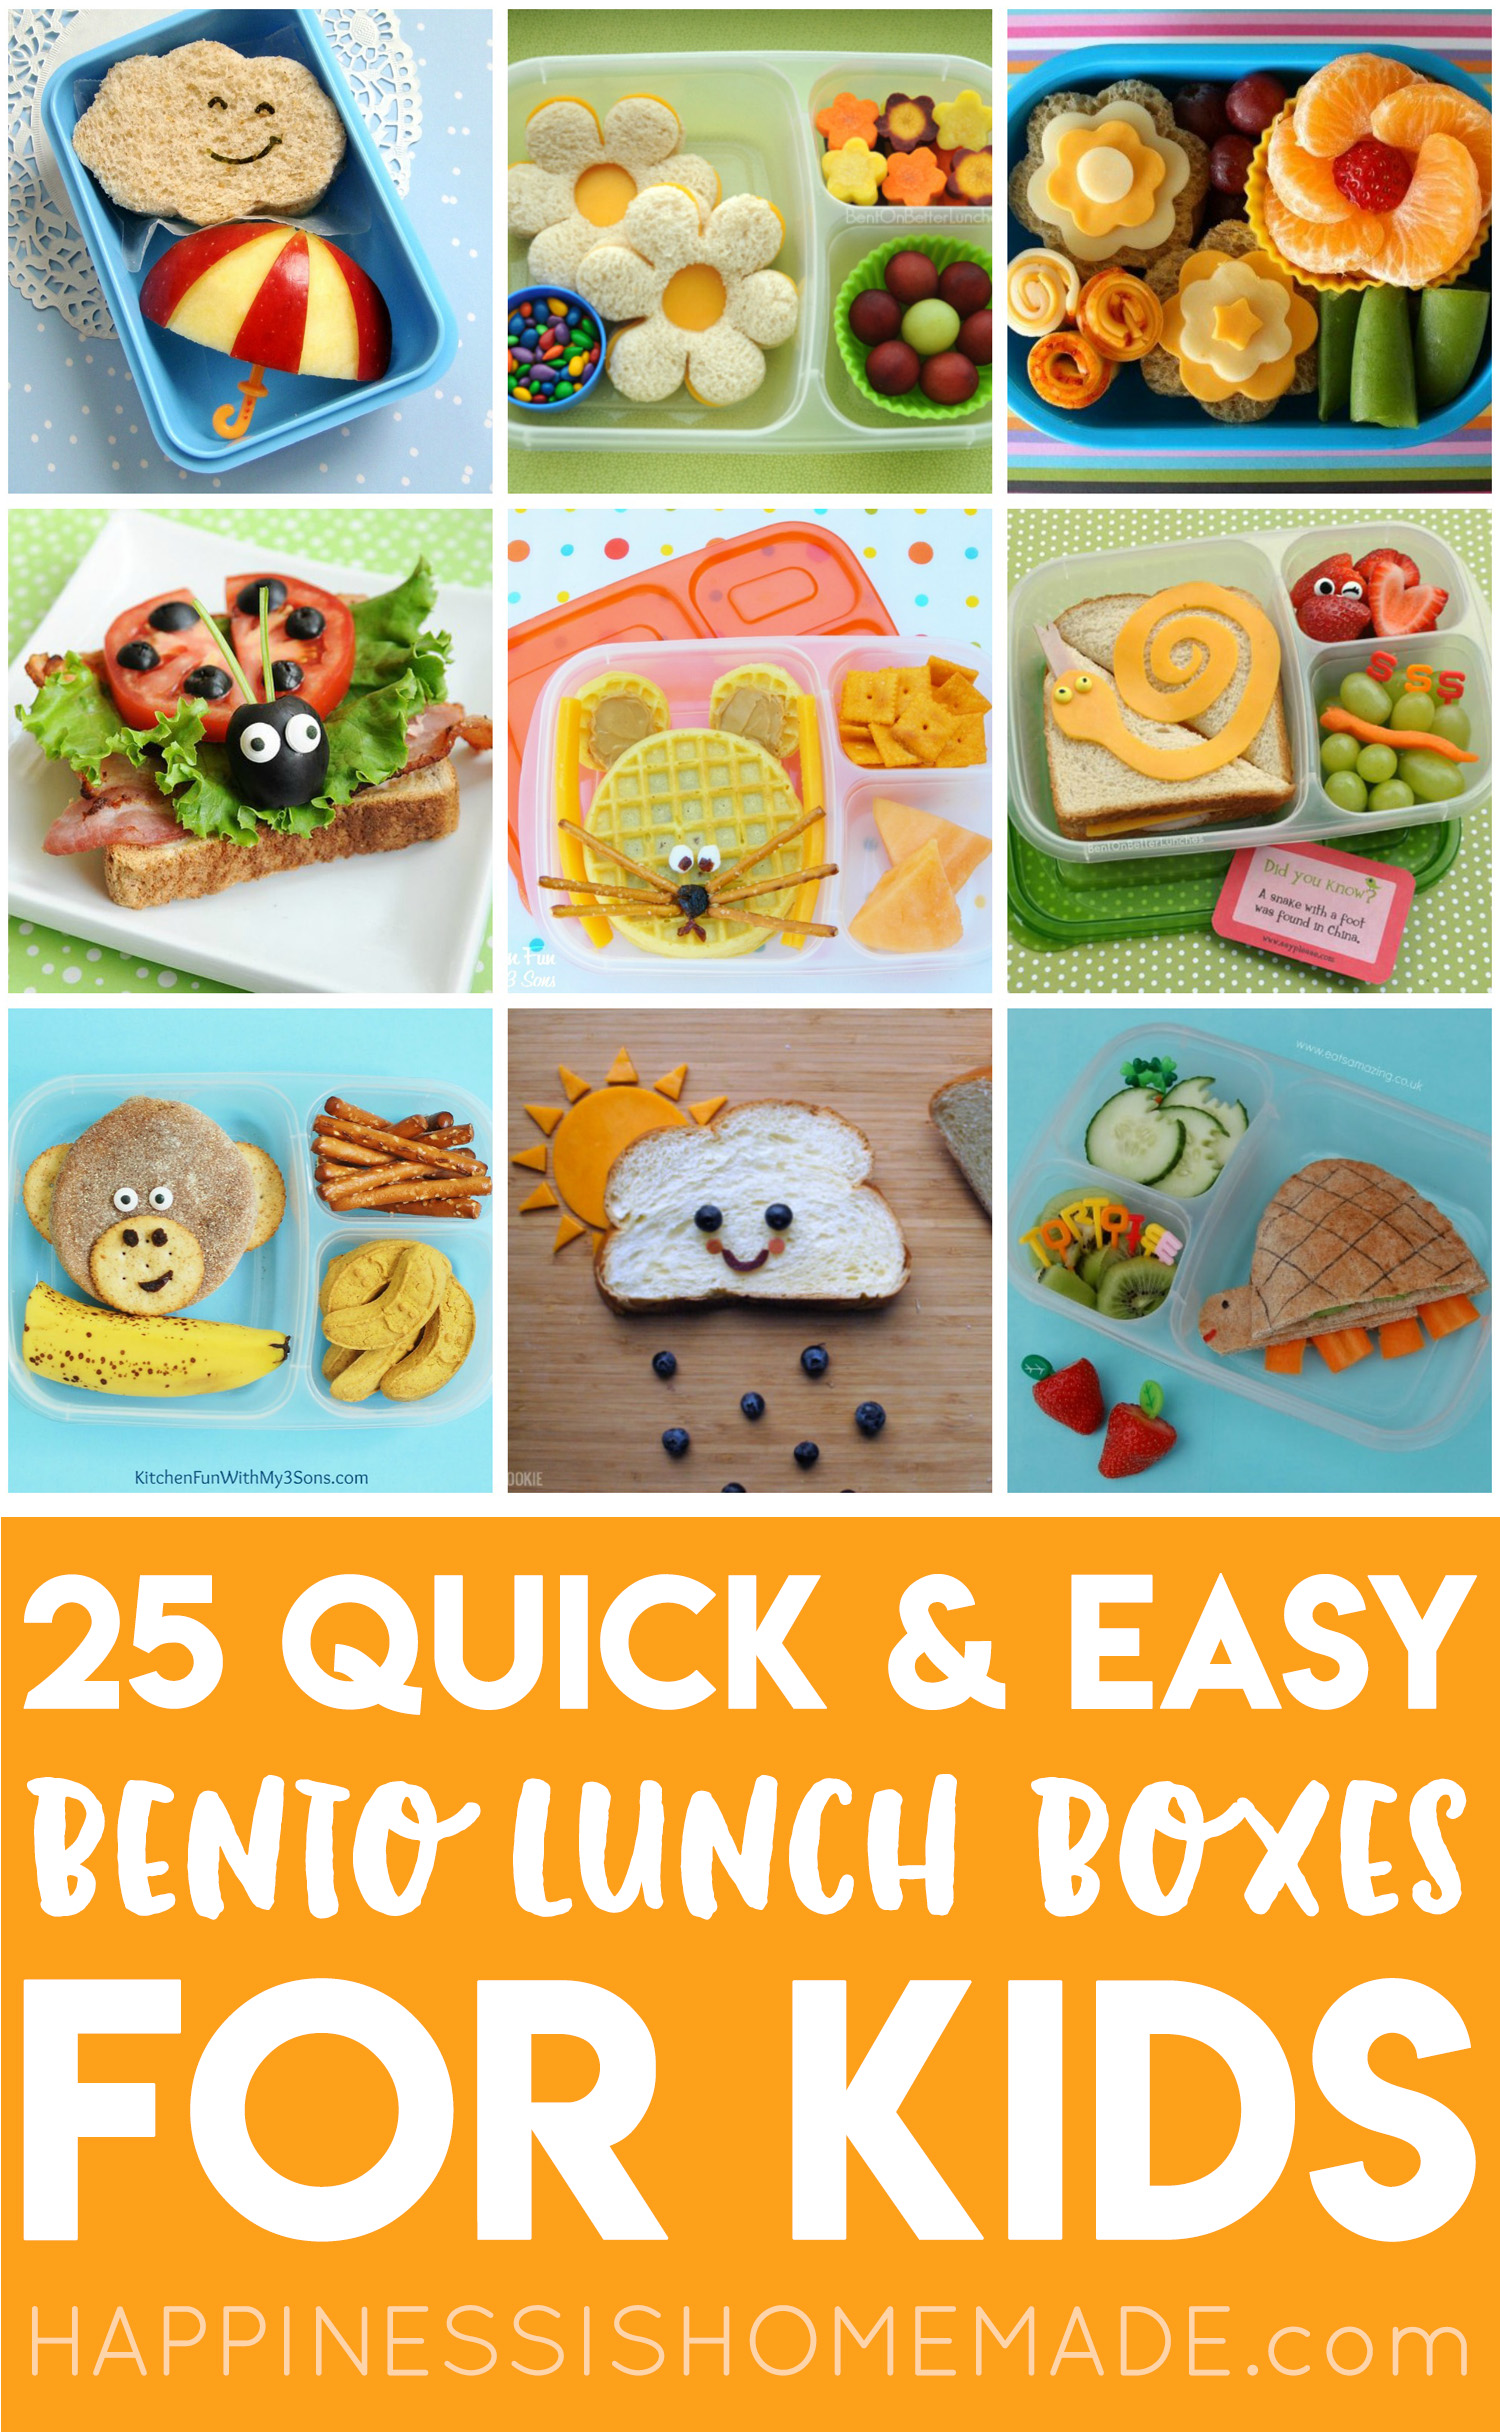 https://www.happinessishomemade.net/wp-content/uploads/2018/06/Quick-and-Easy-Kids-Bento-Lunch-Box-Ideas.jpg